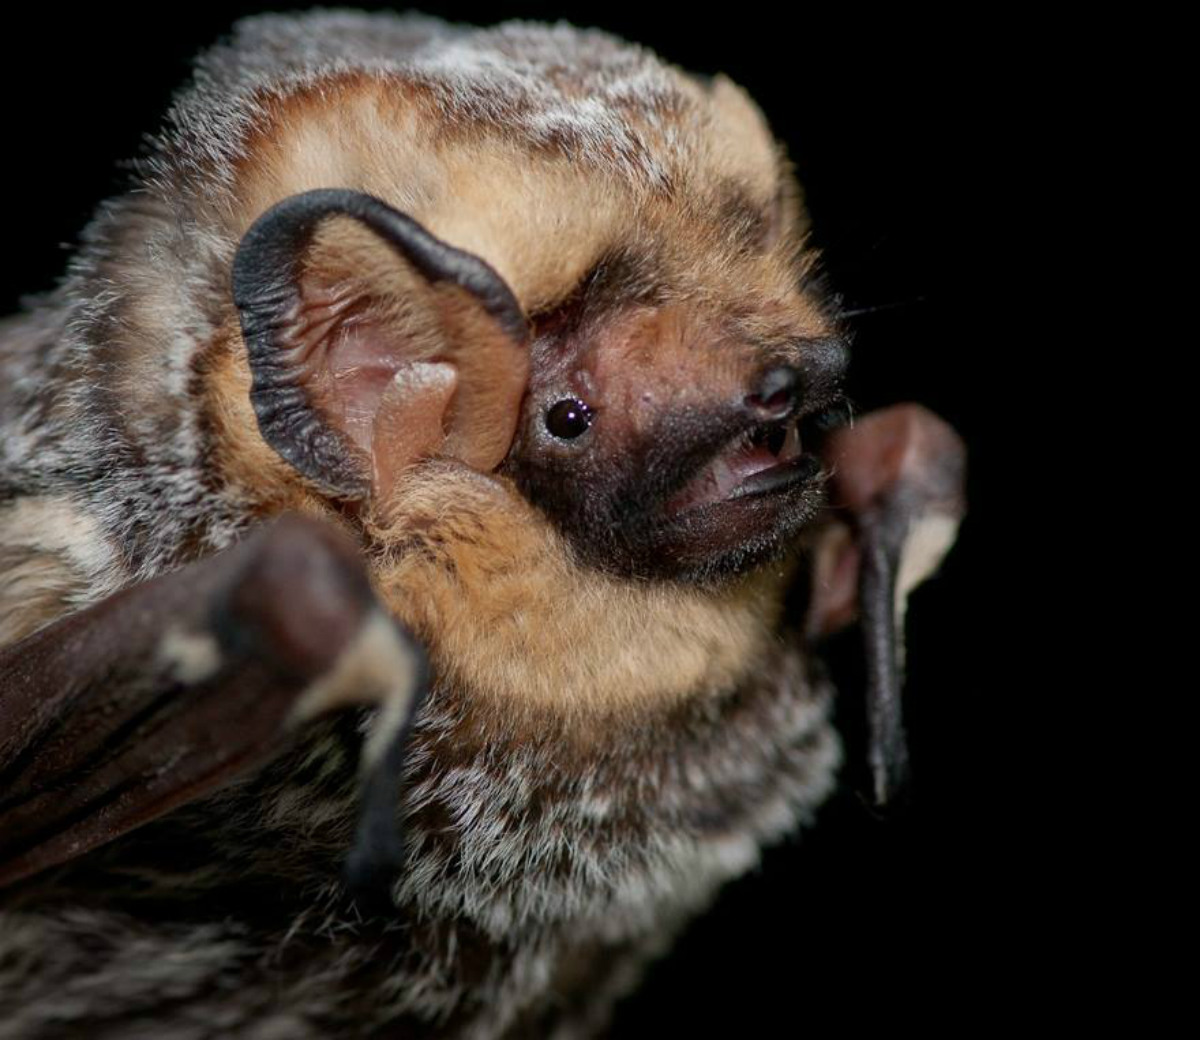 A brown bat with a small face on a big head with large ears.